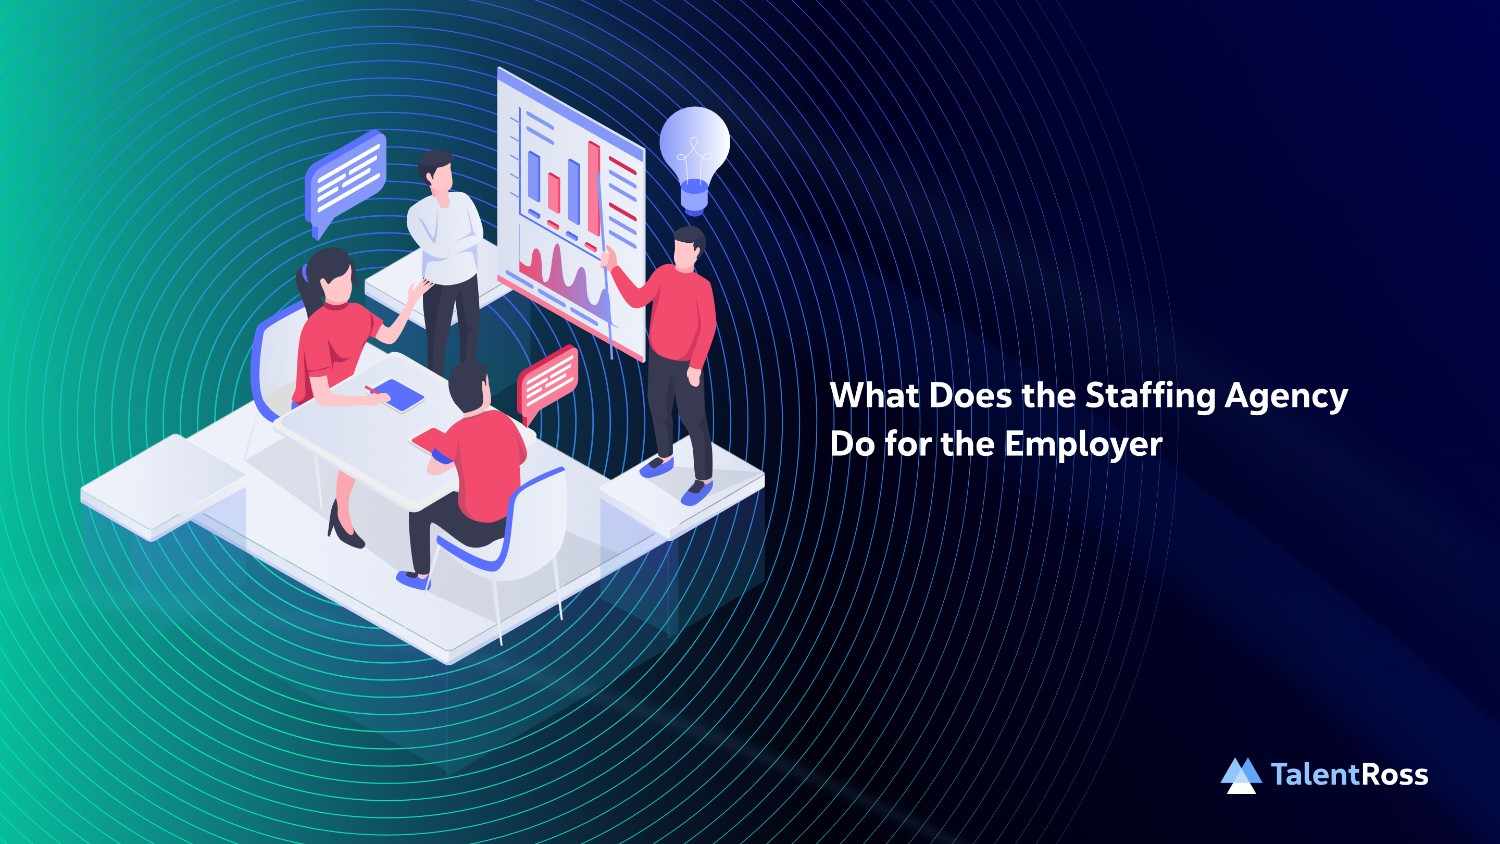 What Does the Staffing Agency Do for the Employer